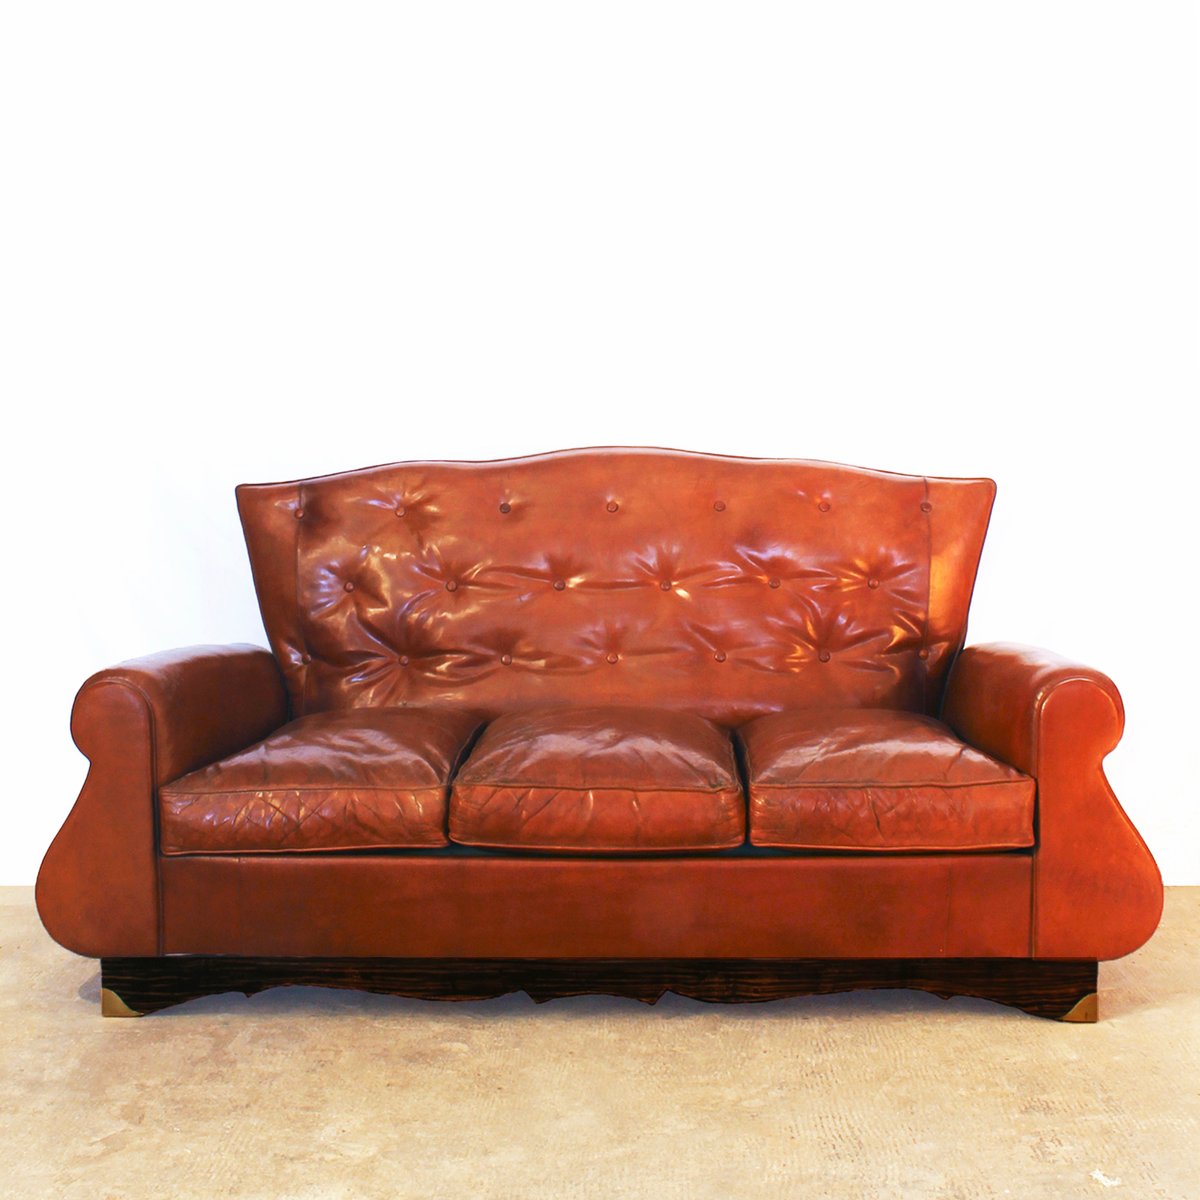  Chesterfield  Style  Sofa  1940s for sale at Pamono